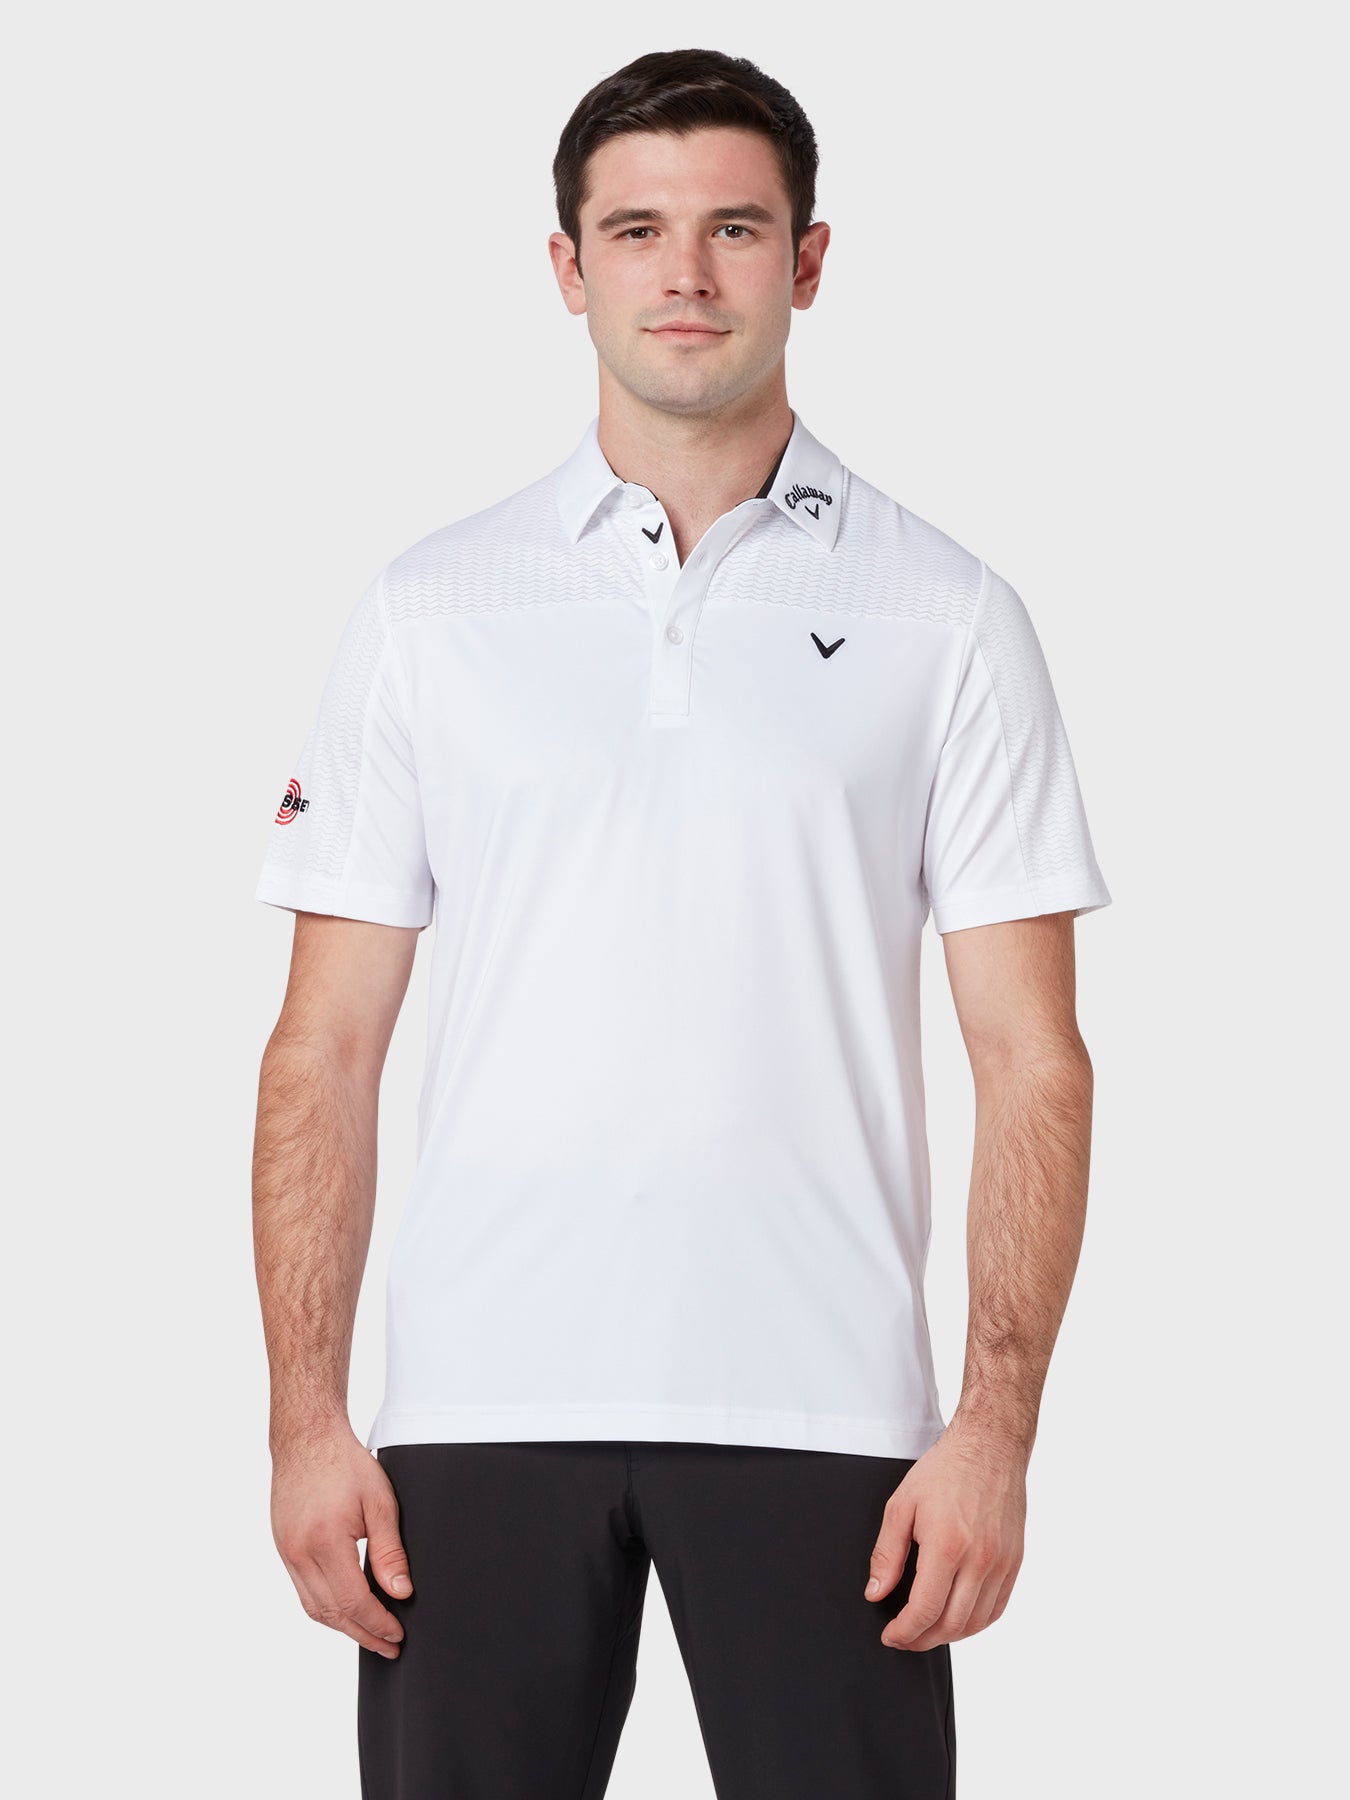 View Odyssesy Ventilated Polo In Bright White information